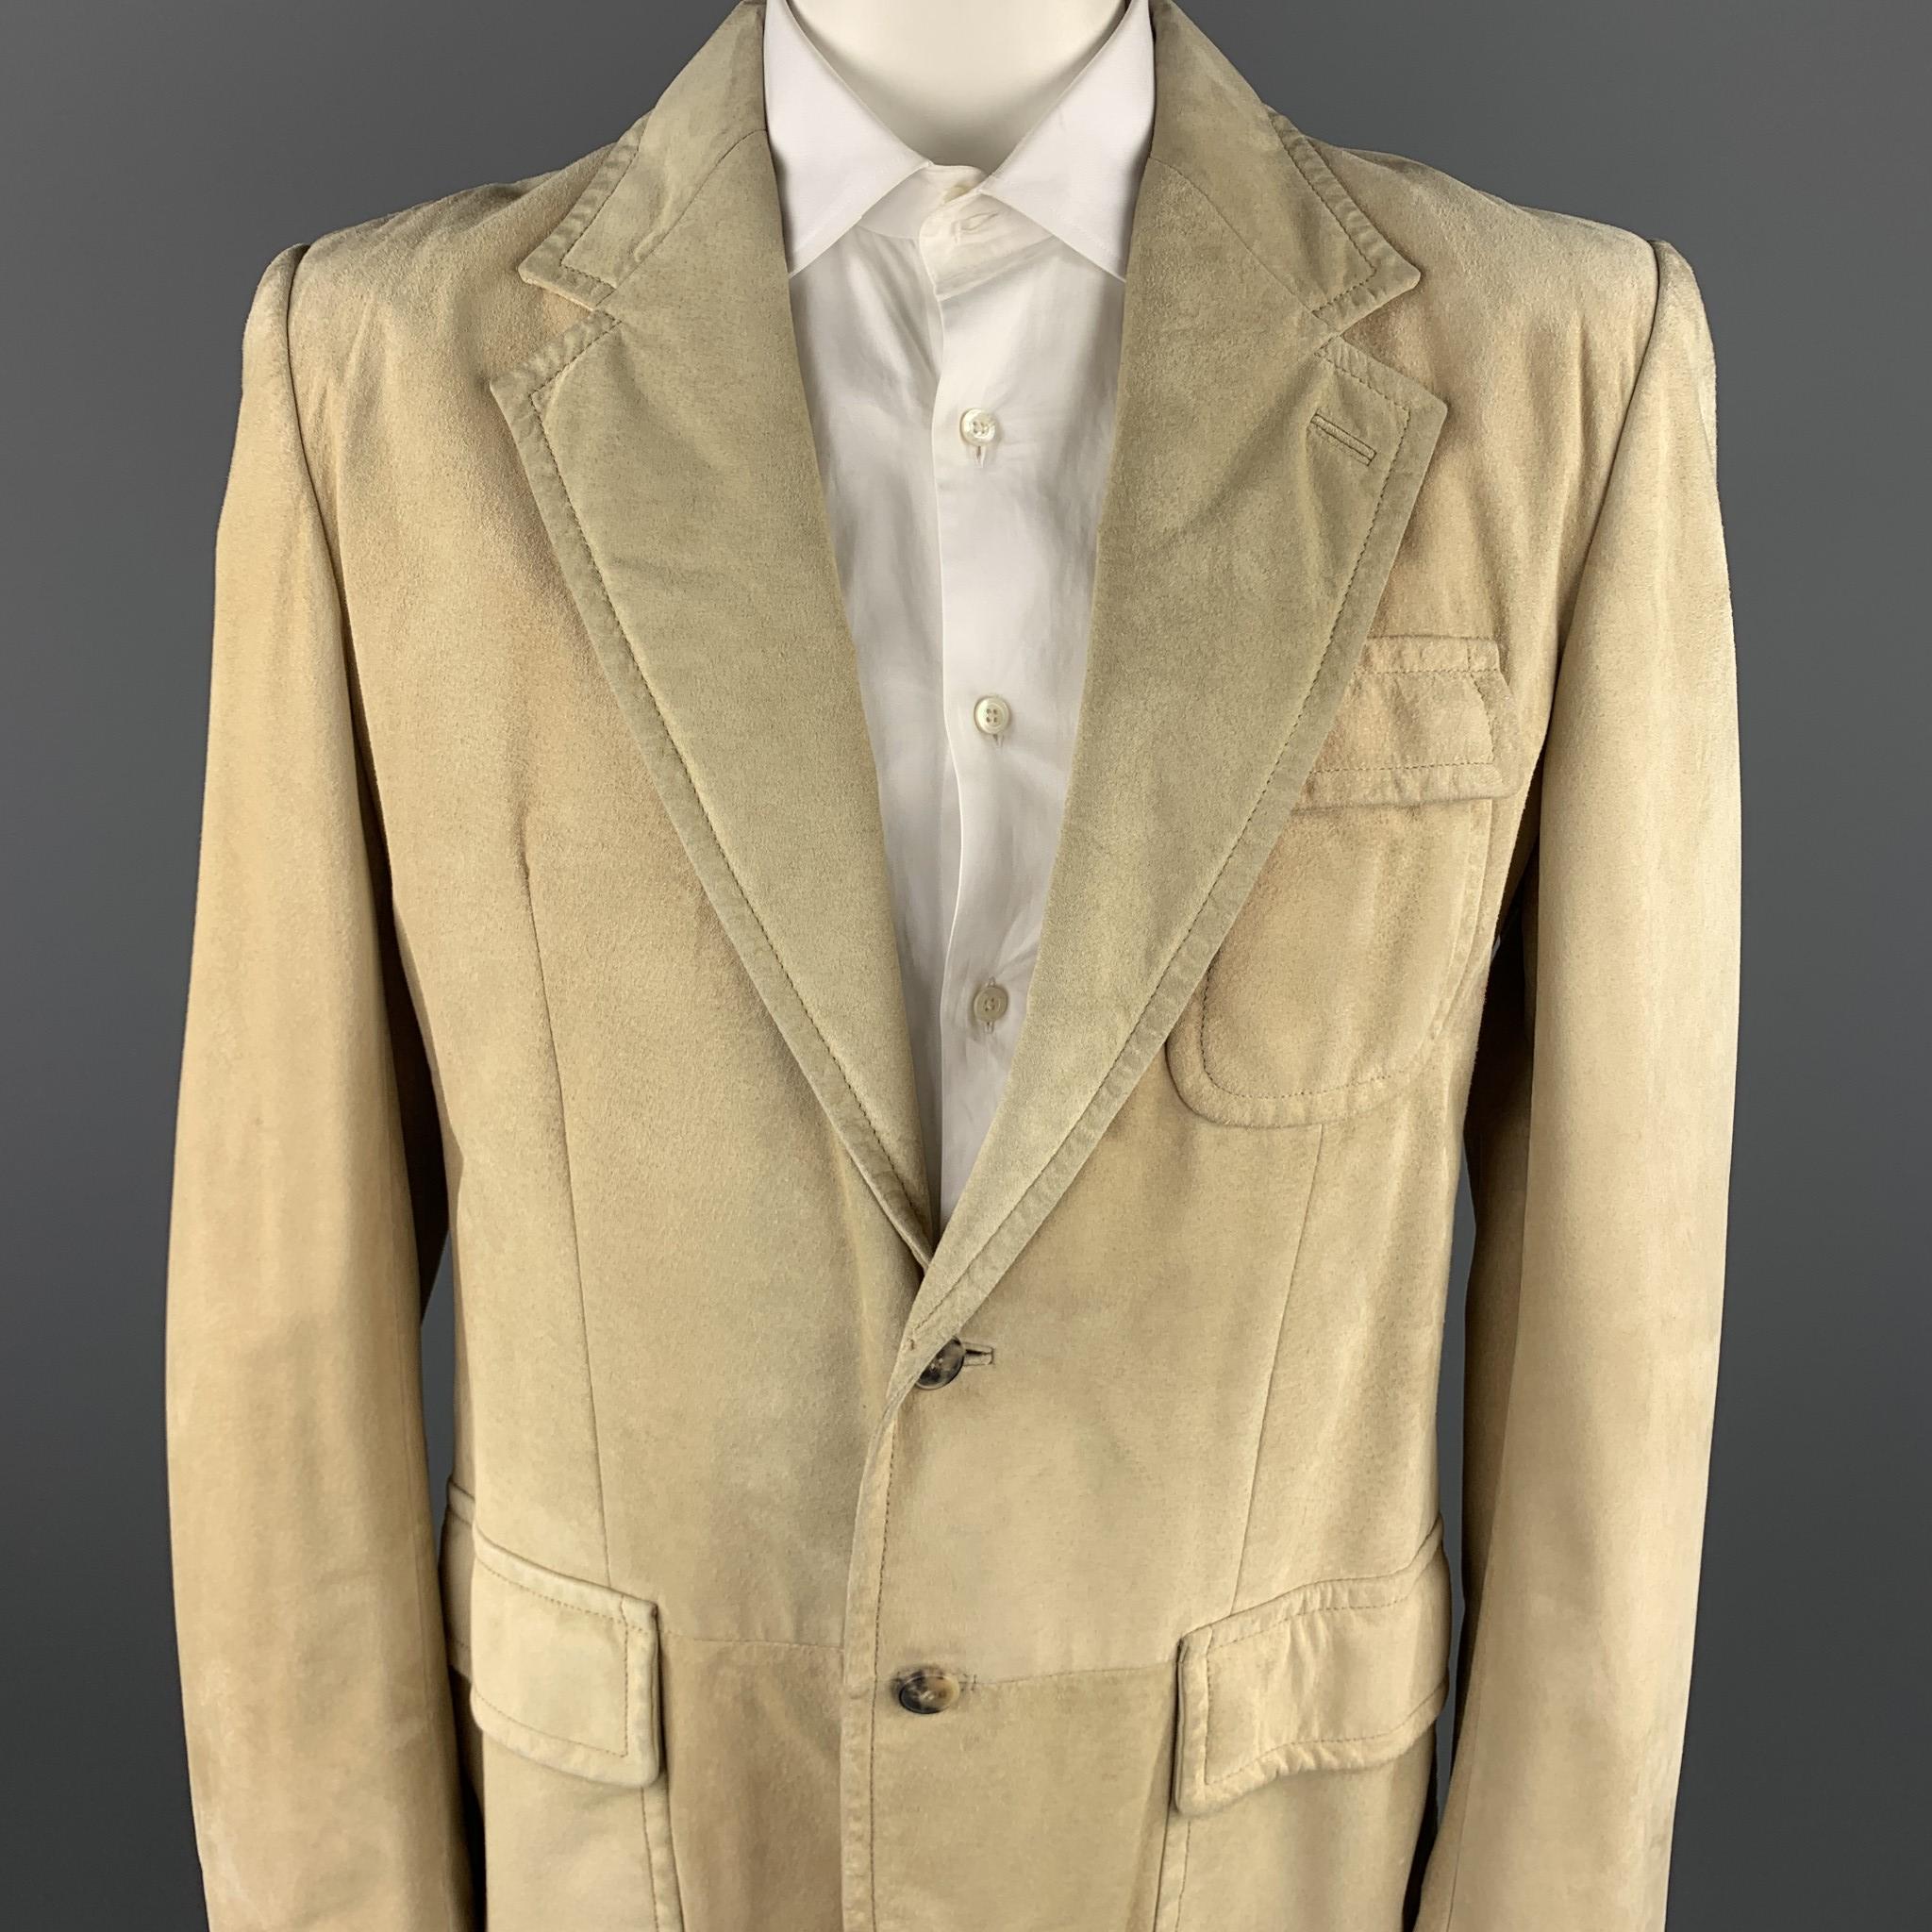 YVES SAINT LAURENT Rive Gauche by Tom Ford blazer jacket comes in a thick natural suede featuring a notch lapel, flap pockets, and a two button closure. Made in Italy.

Fair Pre-Owned Condition.
Marked: IT 52

Measurements:

Shoulder: 19 in. 
Chest: